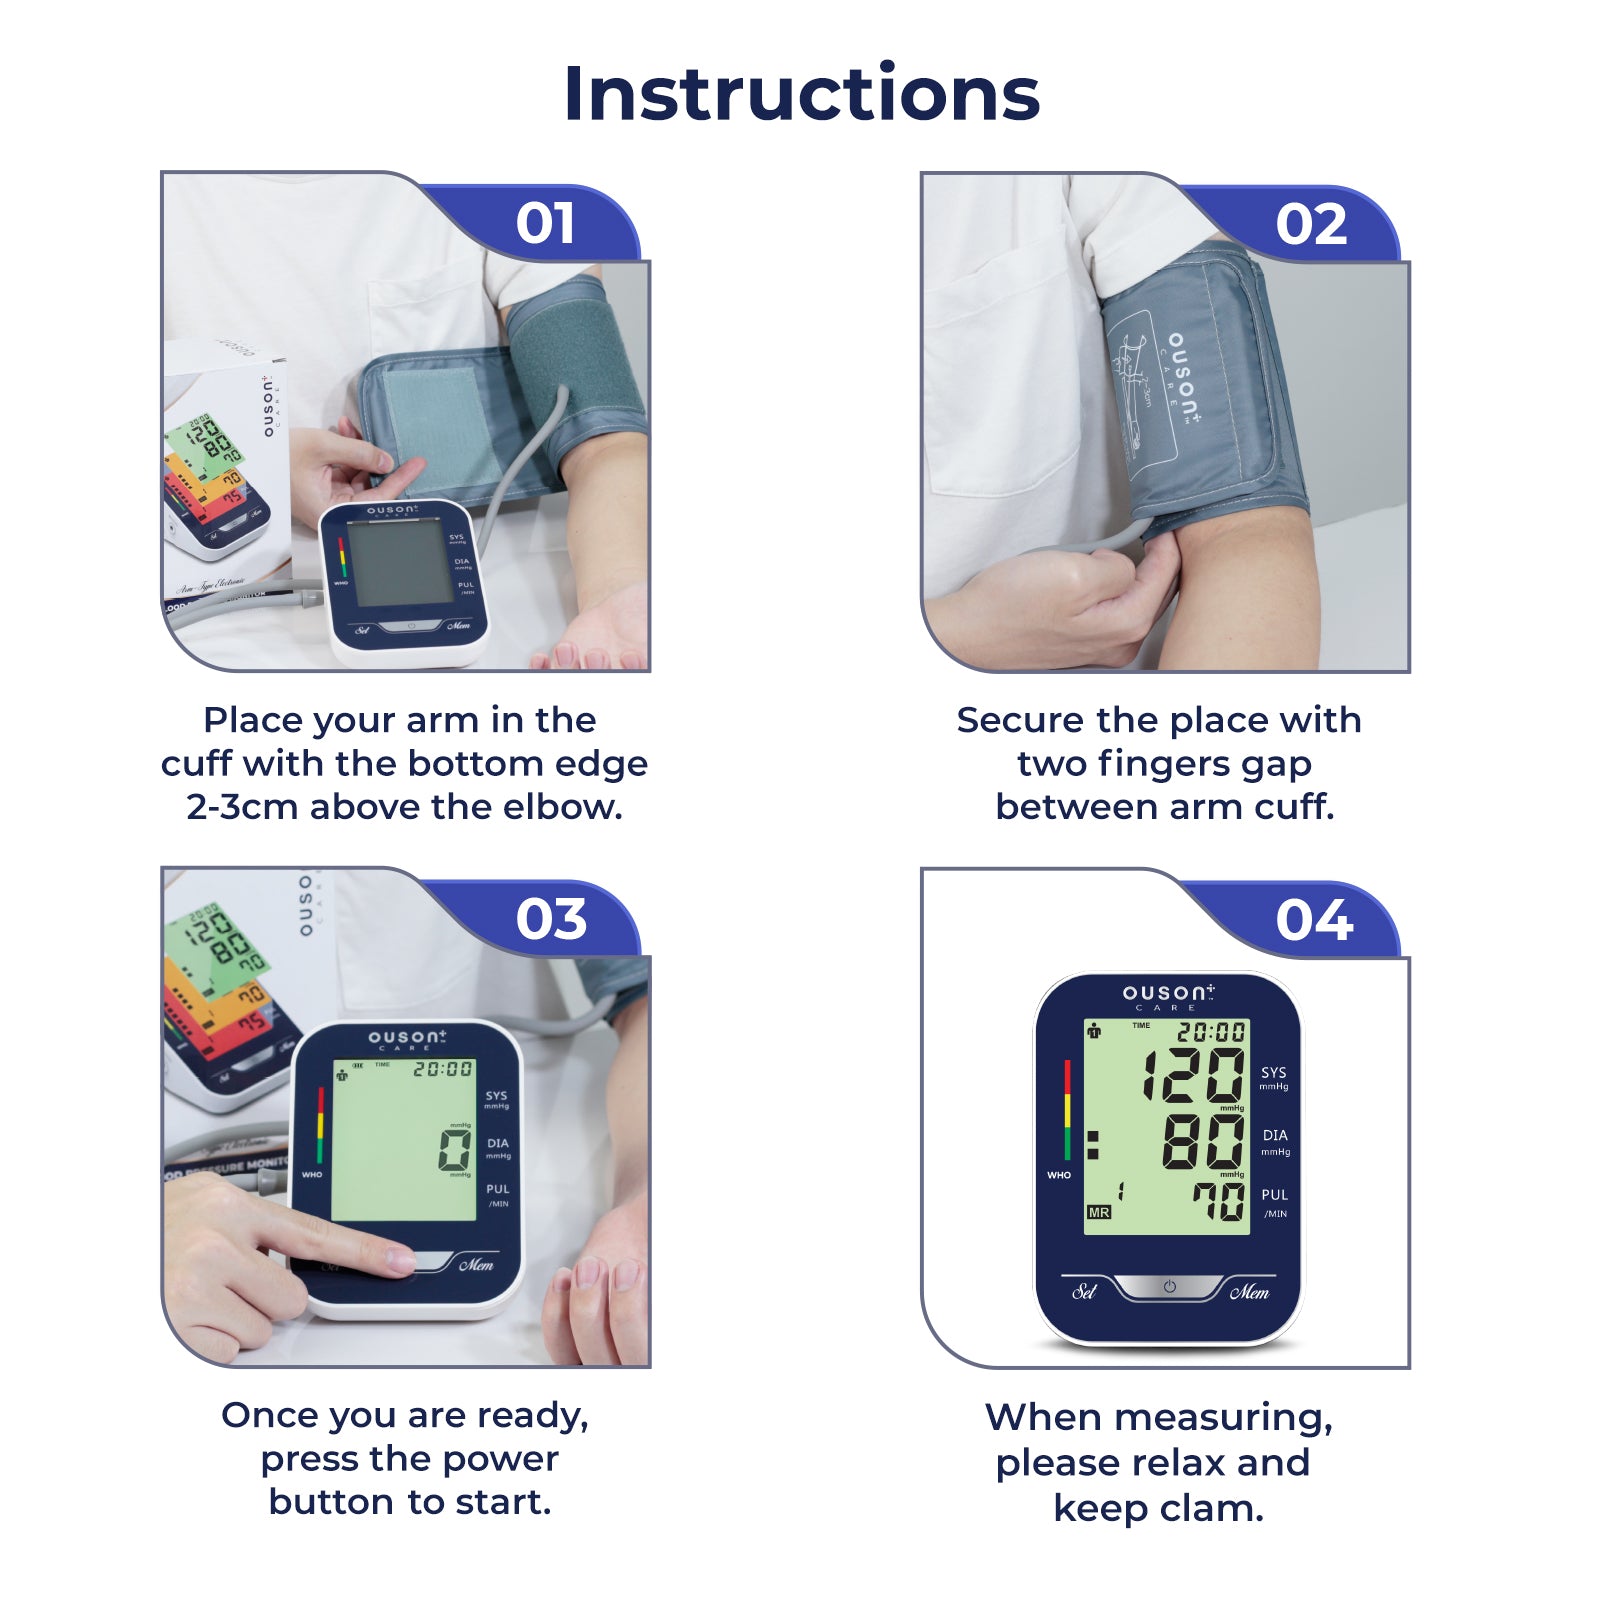 Ouson Care Arm Type Electronic Blood Pressure Monitor [BSX523]